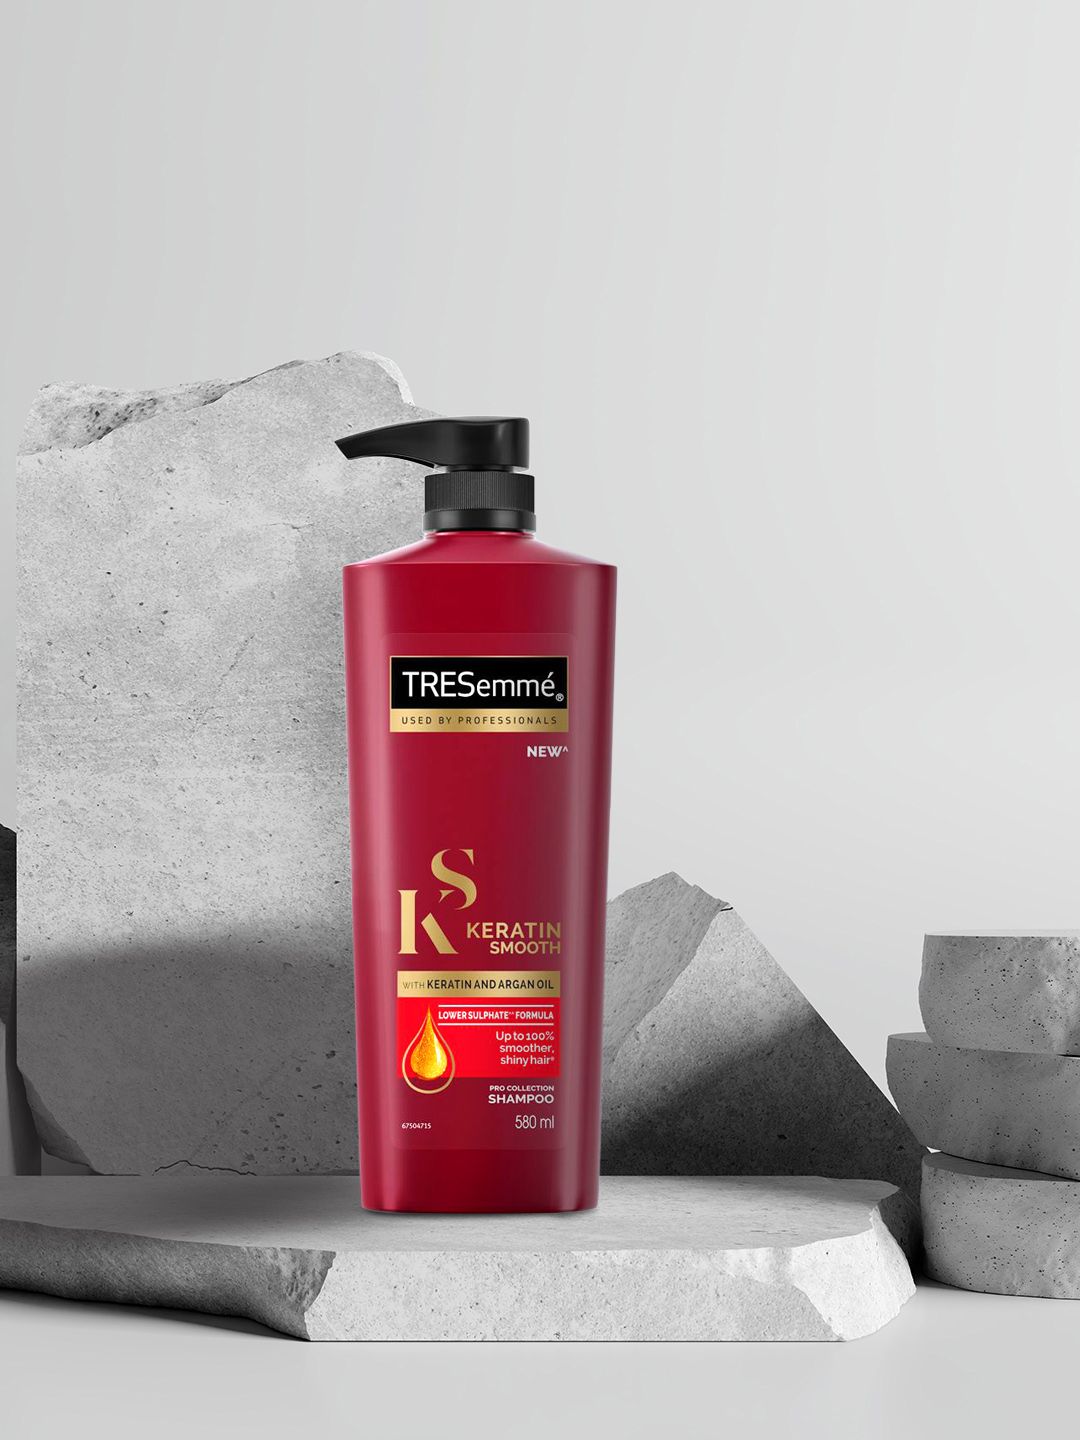 TRESemme Keratin Smooth Shampoo With Argan Oil 580 ml Price in India